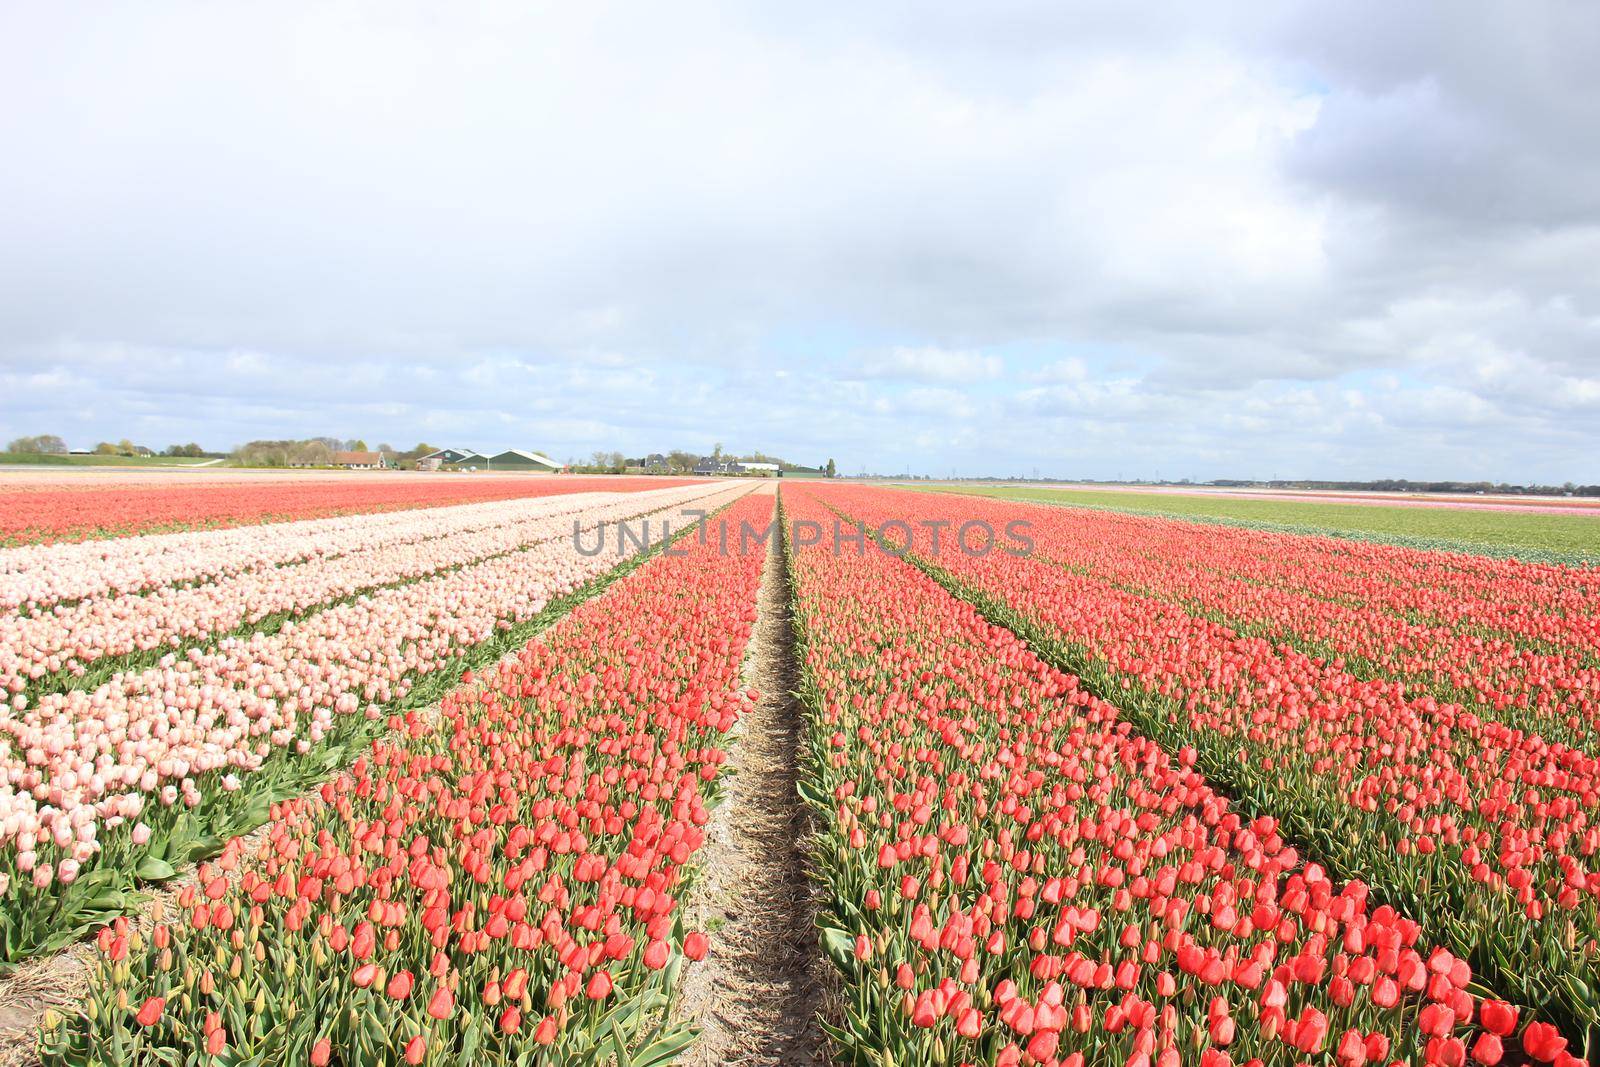 Tulips in a field: Tulips in various colors growing on a field, flower bulb industry